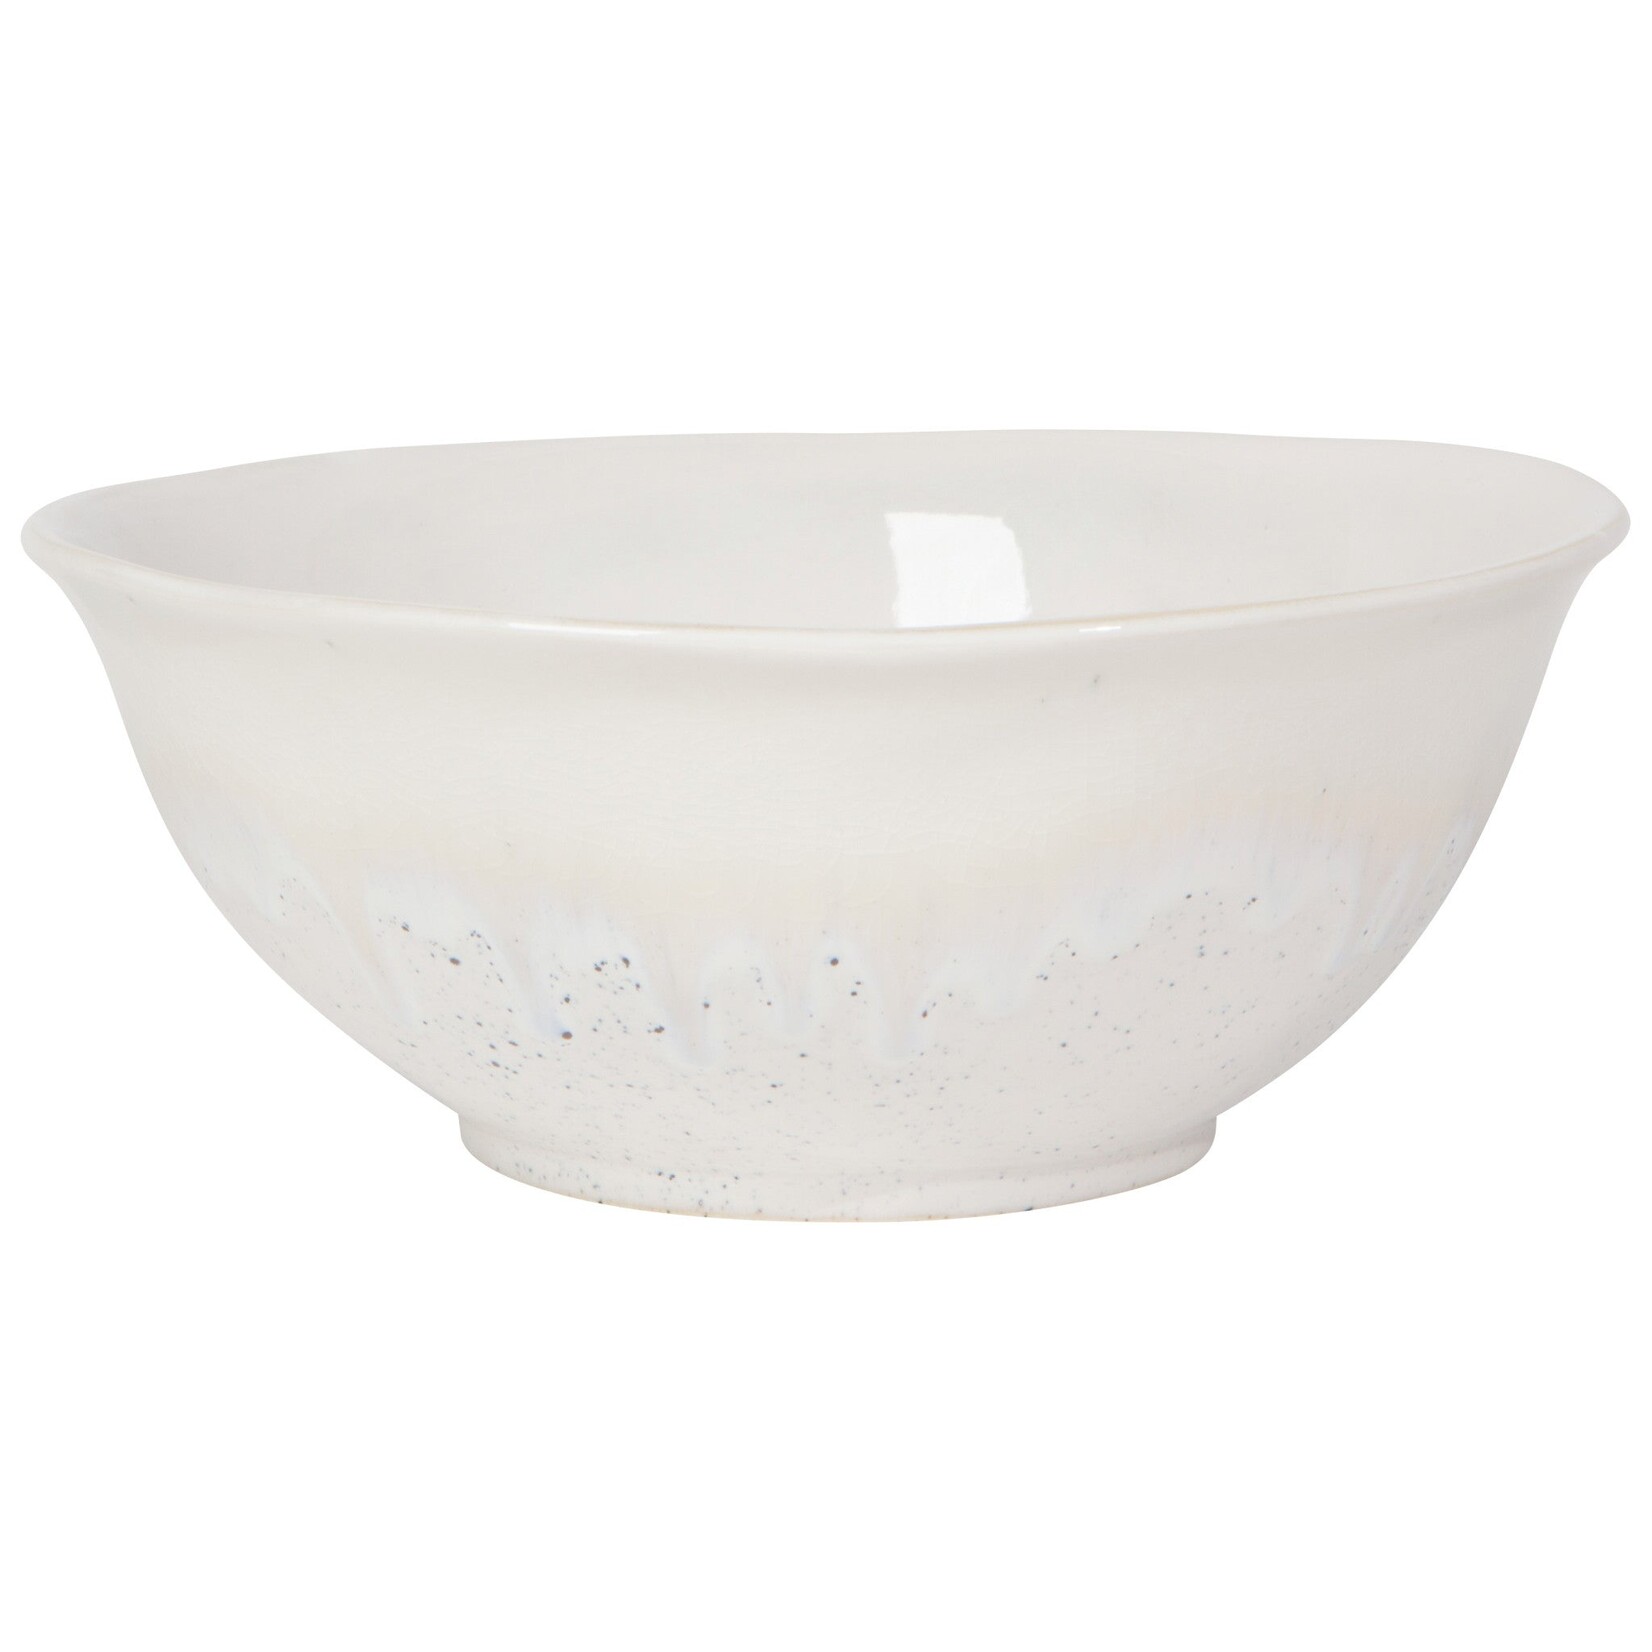 Andes Bowl - Large